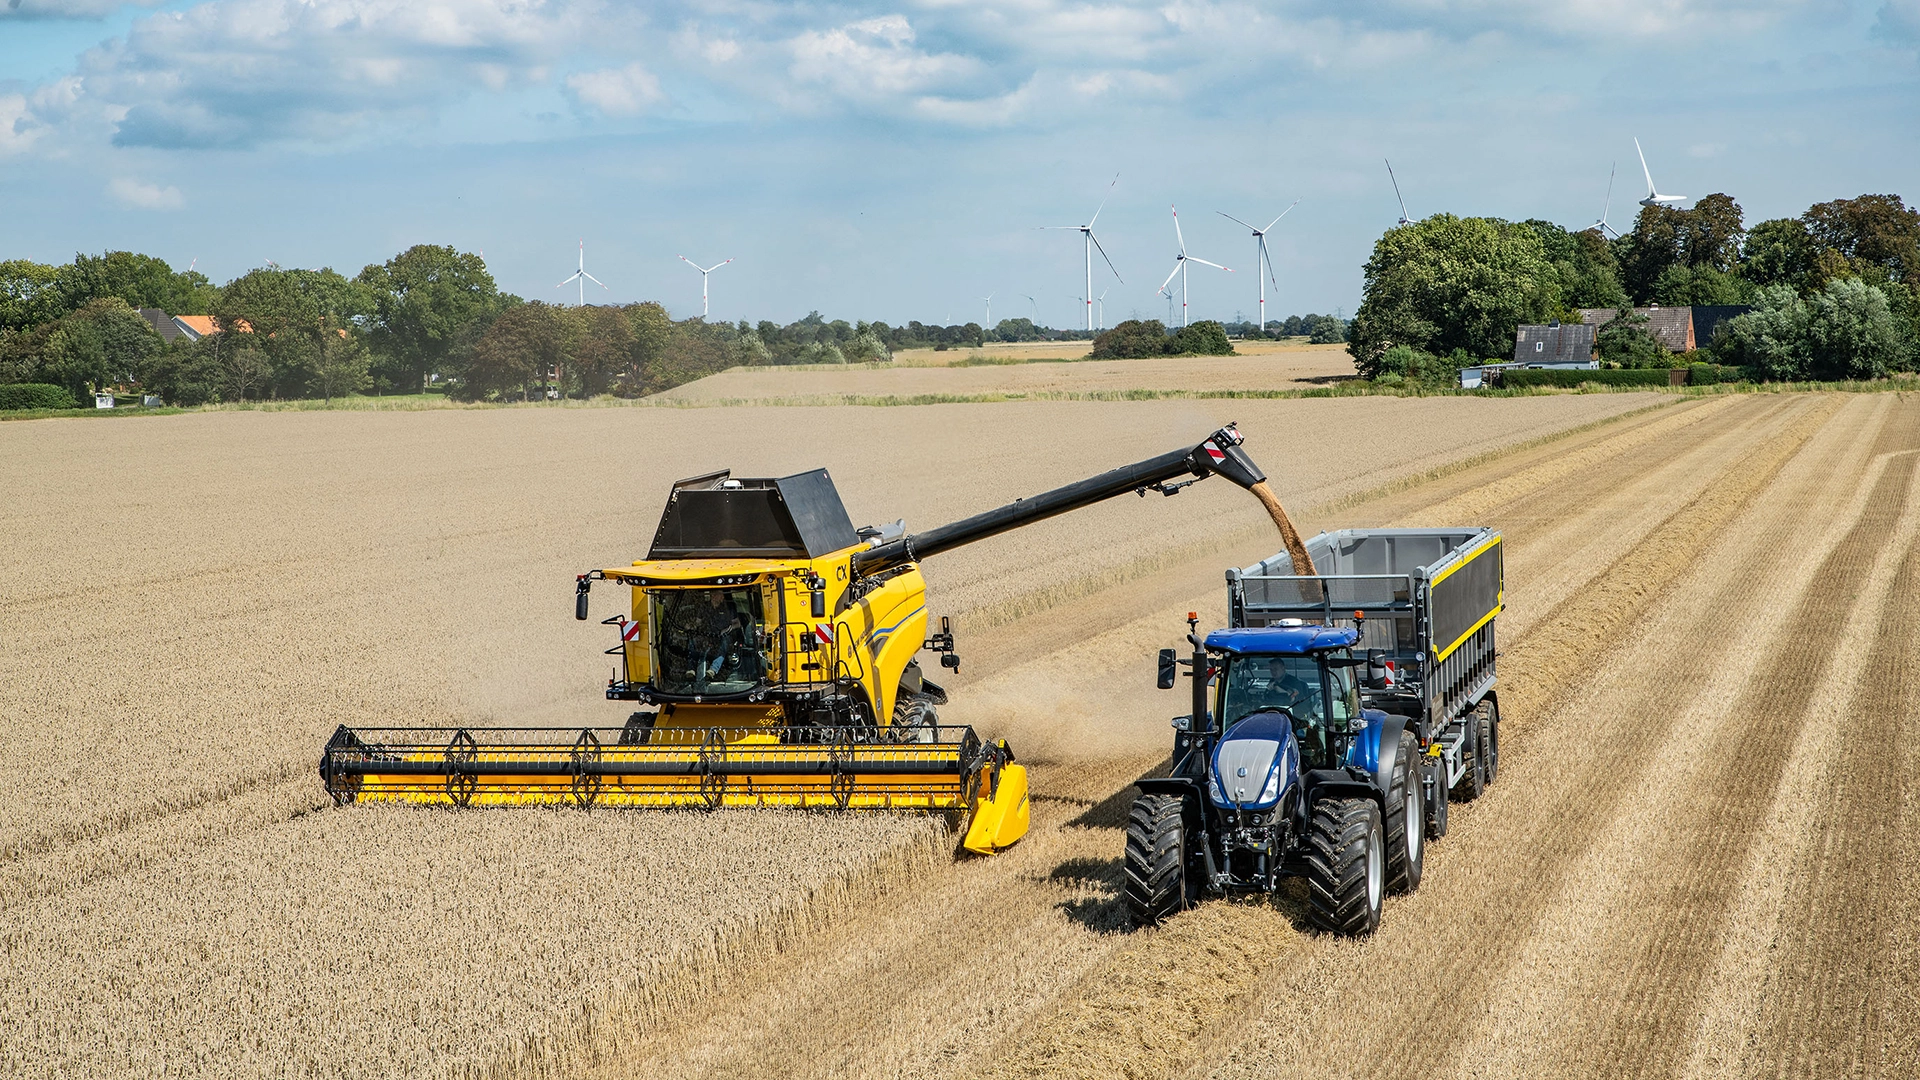 New Holland CX7 & CX8 combine harvester in action, transferring harvested grain into a trailer attached to a blue New Holland tractor.